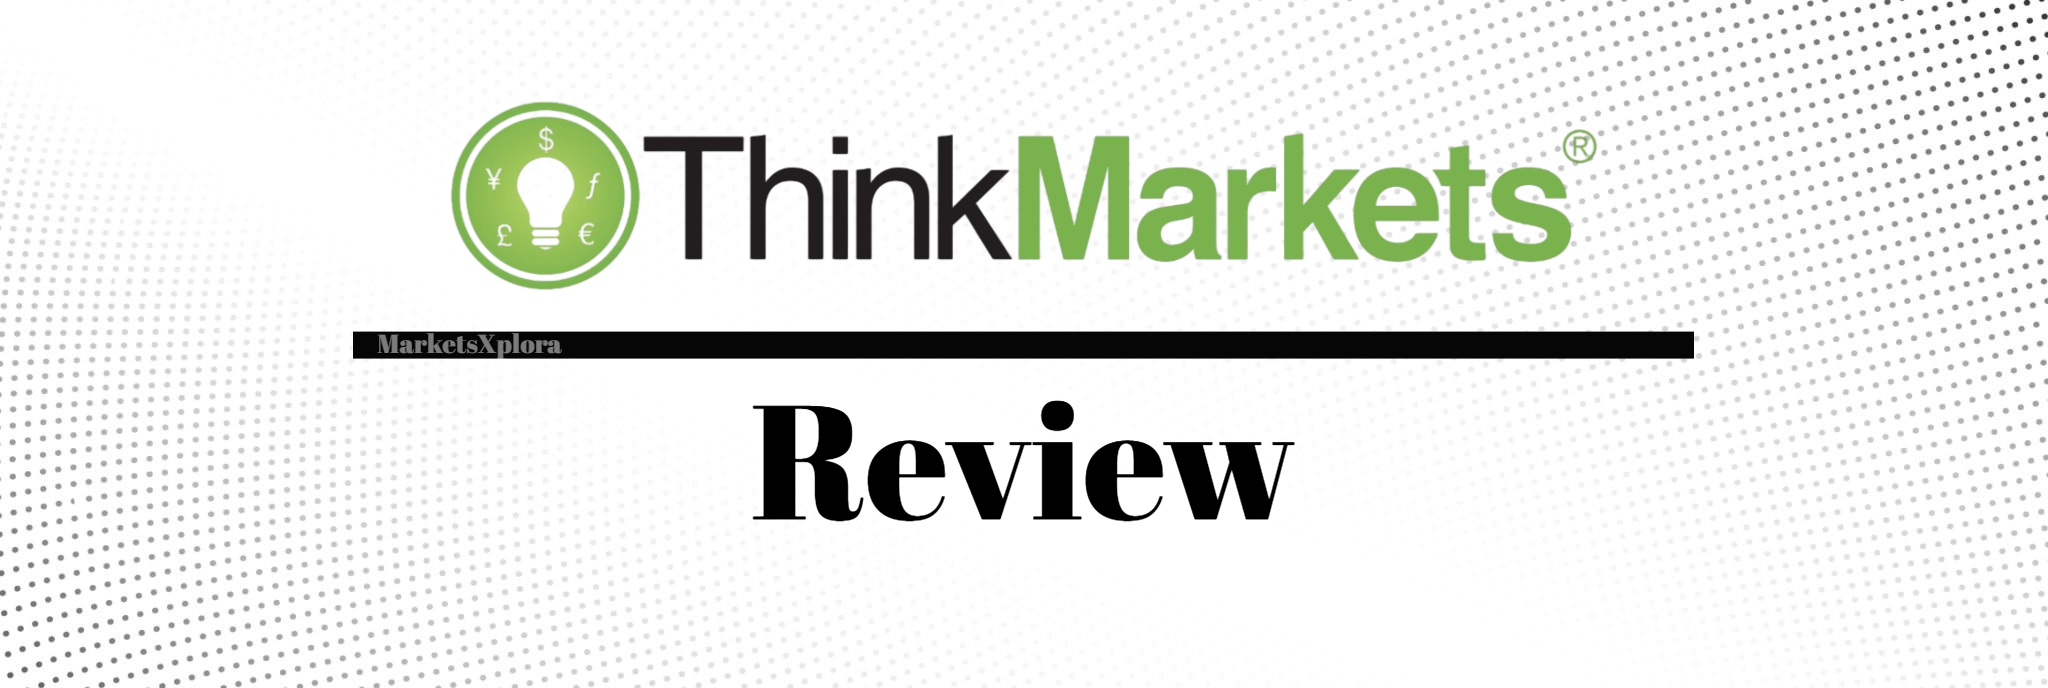 ThinkMarkets Review: Explore this in-depth analysis covering ThinkMarkets' trading platforms, low-cost pricing, diverse account types, cryptocurrency offerings, security, and global regulation.